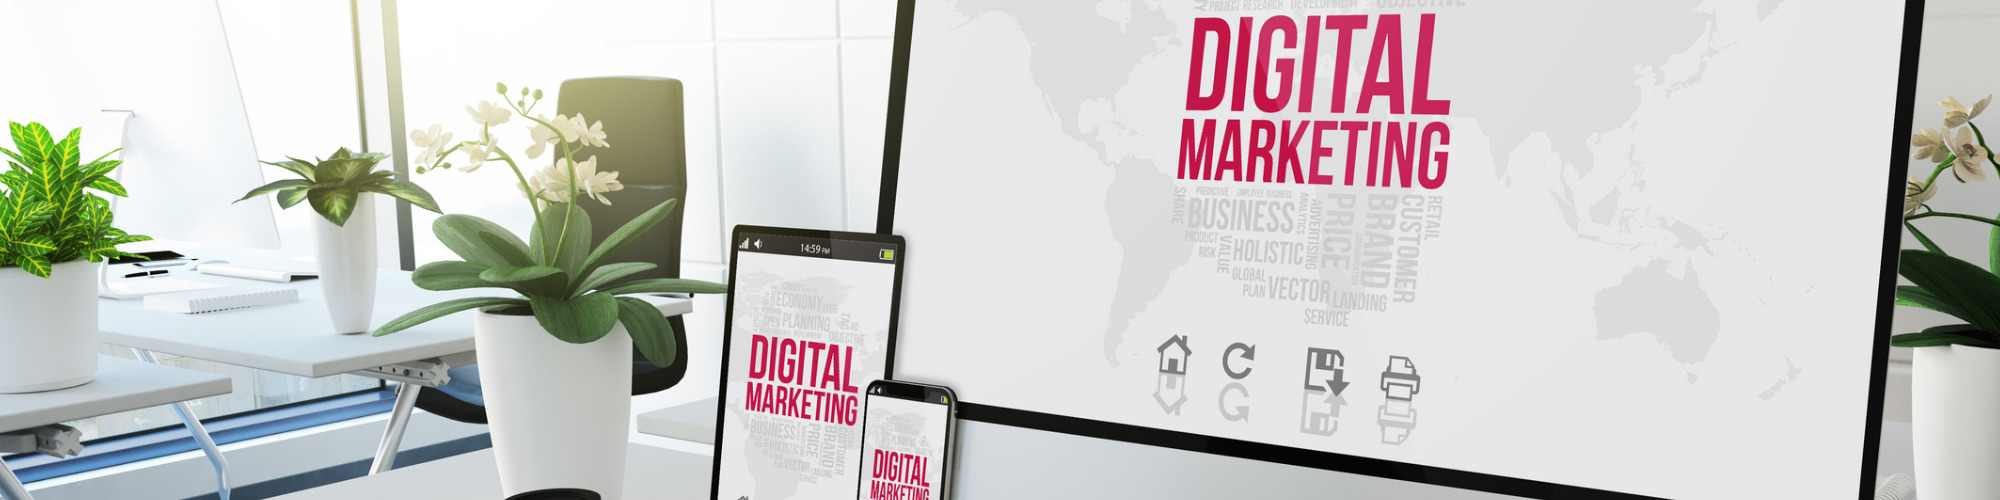 Digital Media & FCA Marketing Requirements - How to Ensure Compliance